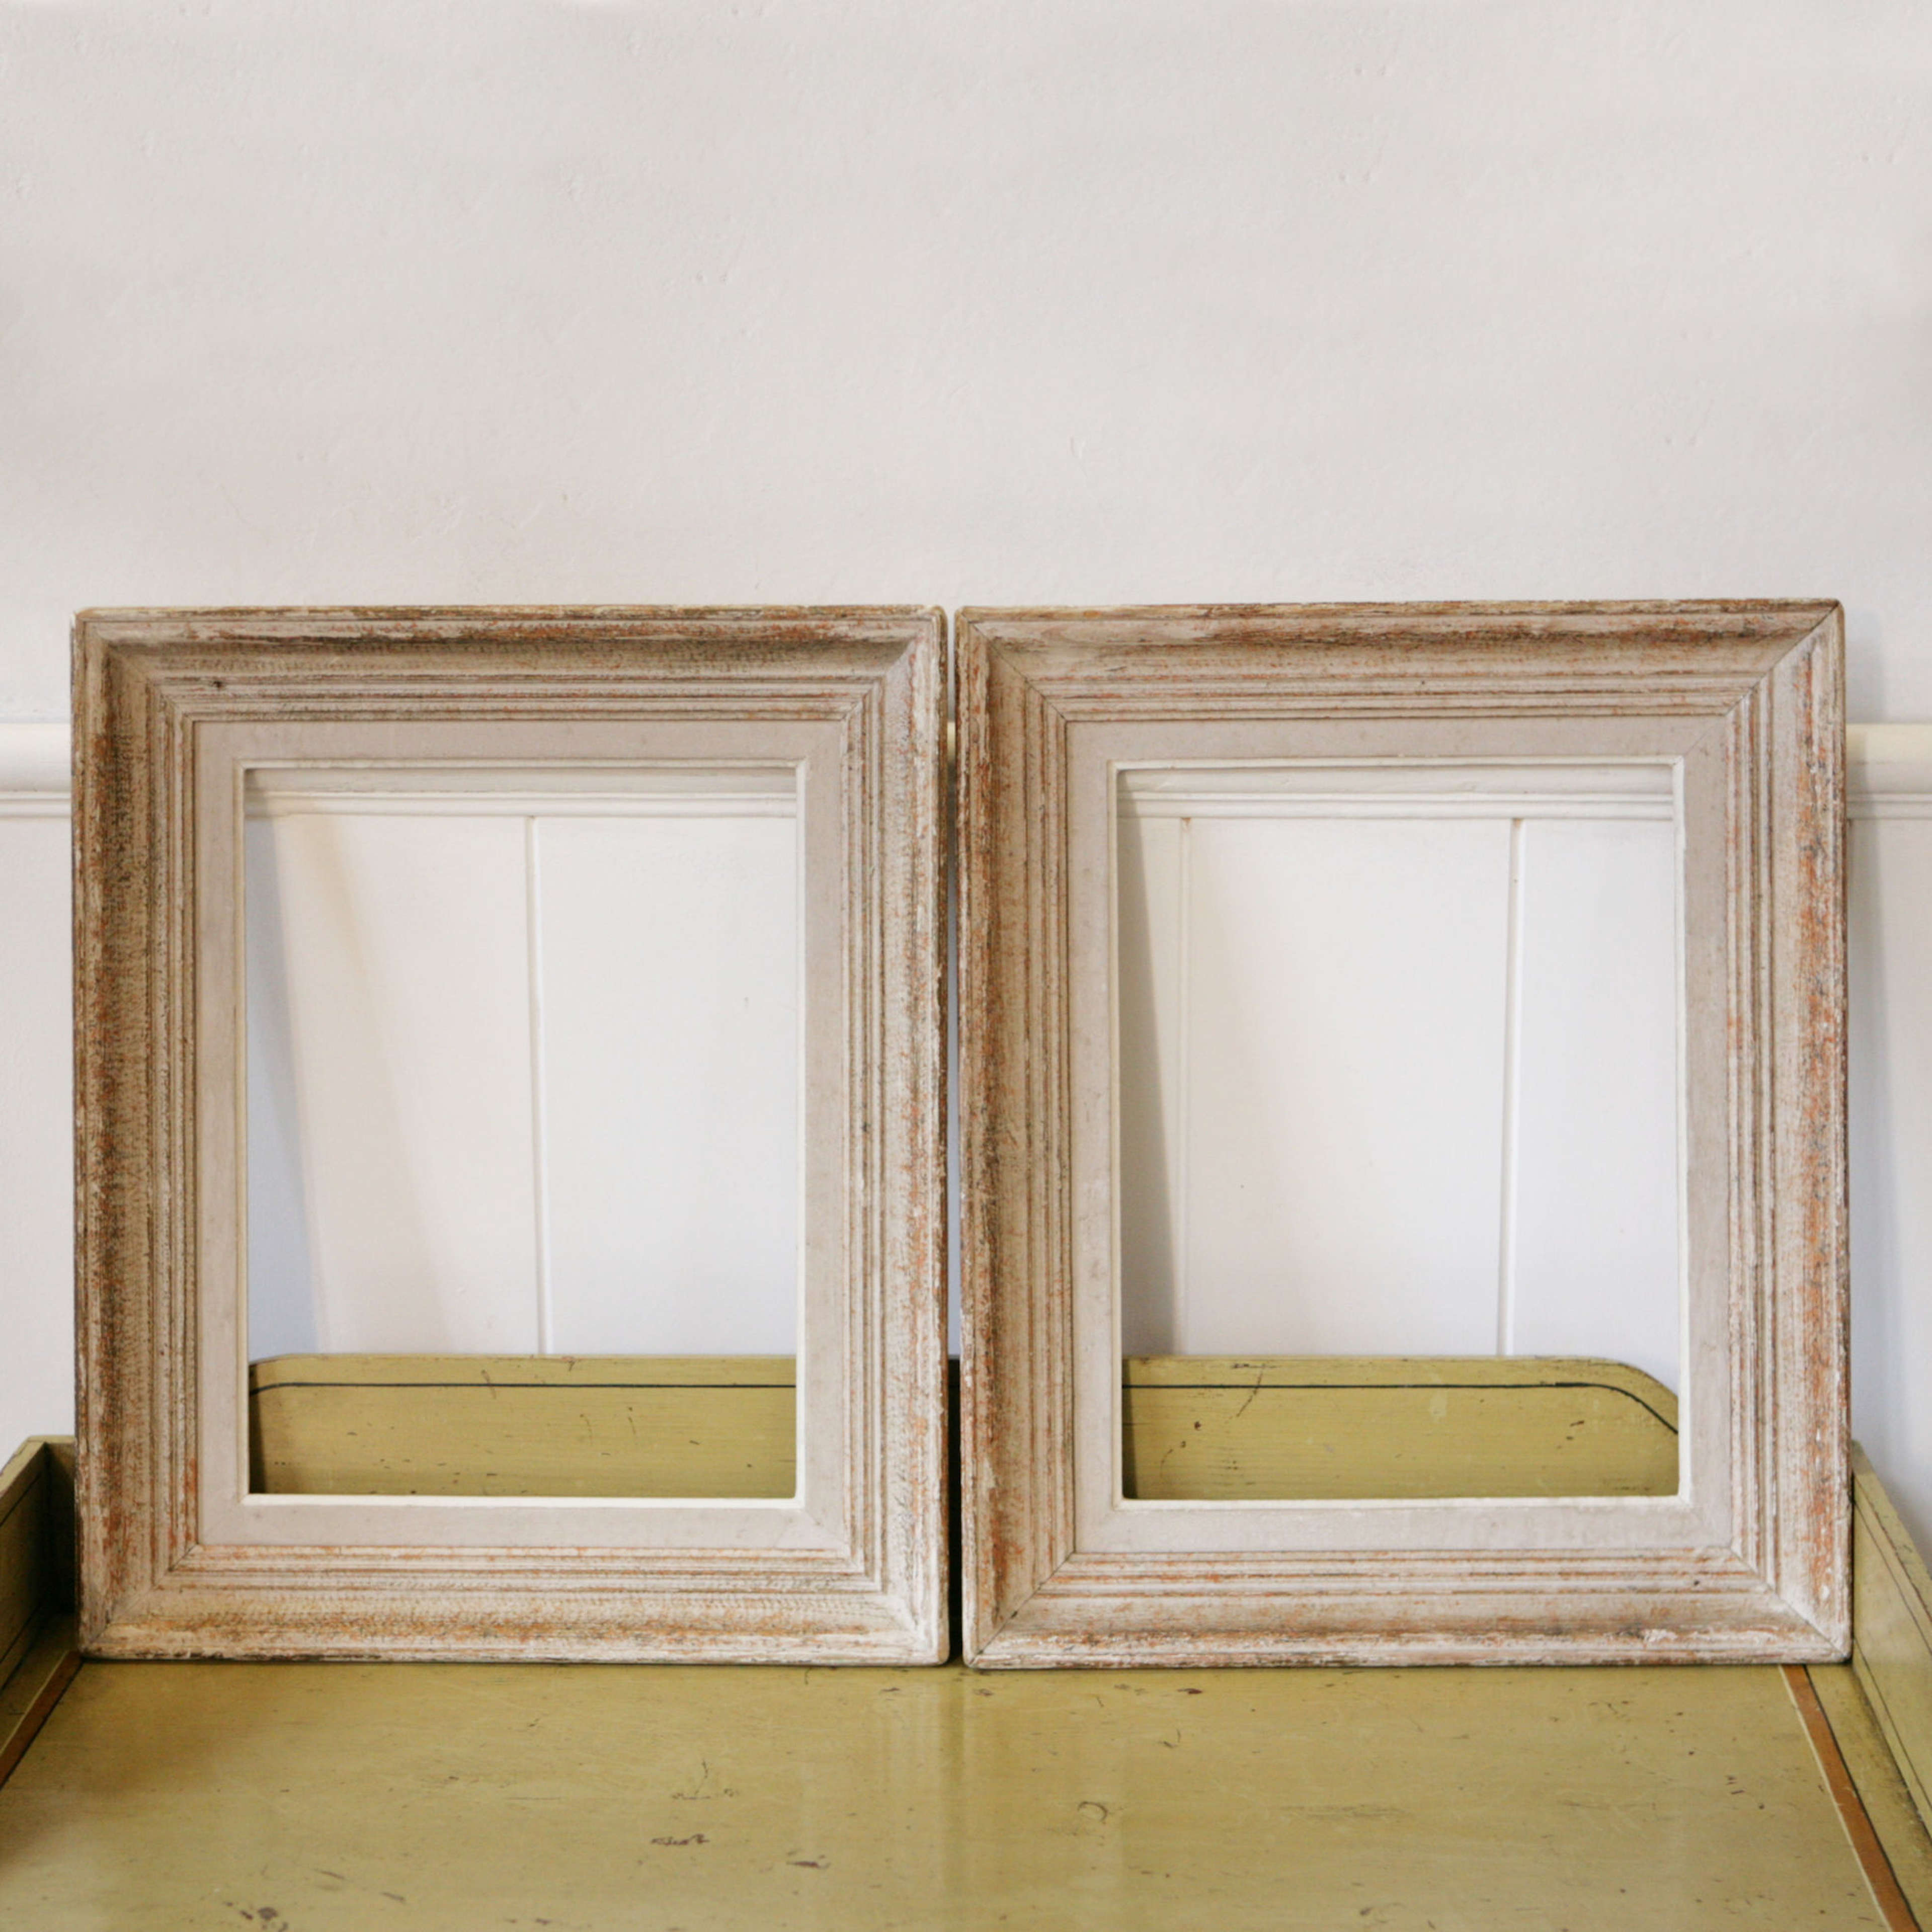 Lovely pair of painted French frames.